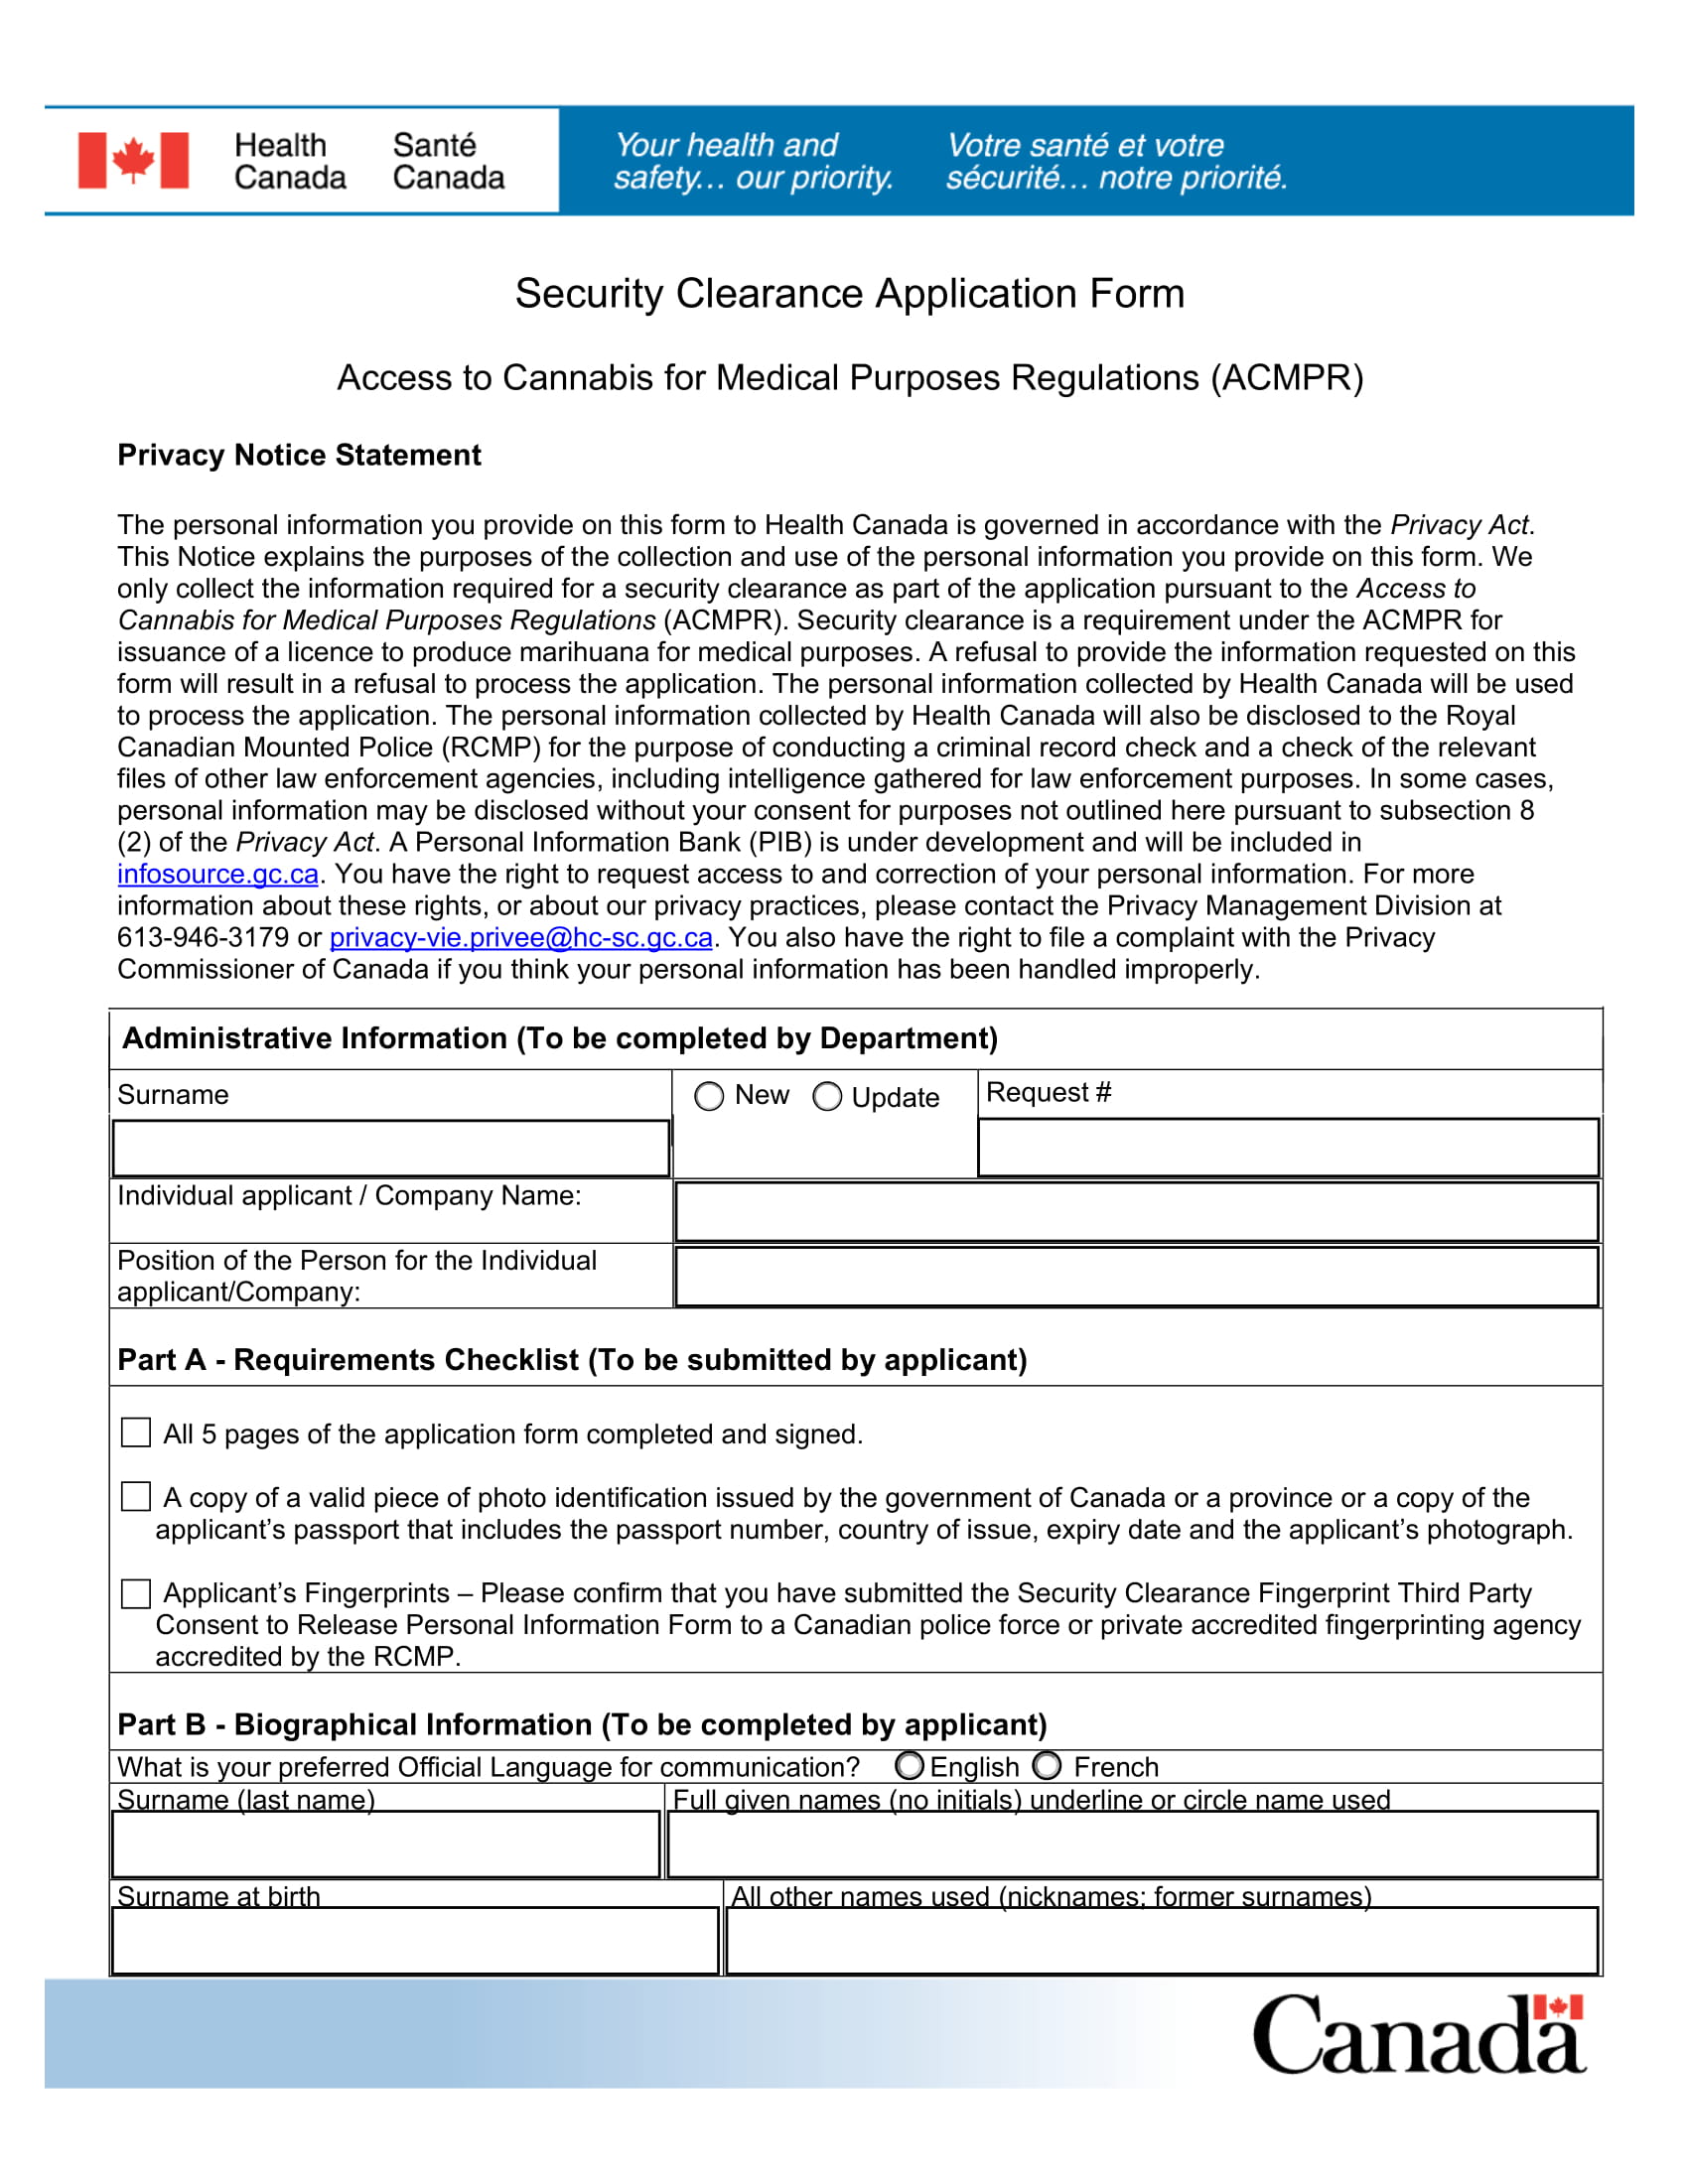 Jobs require secret security clearance